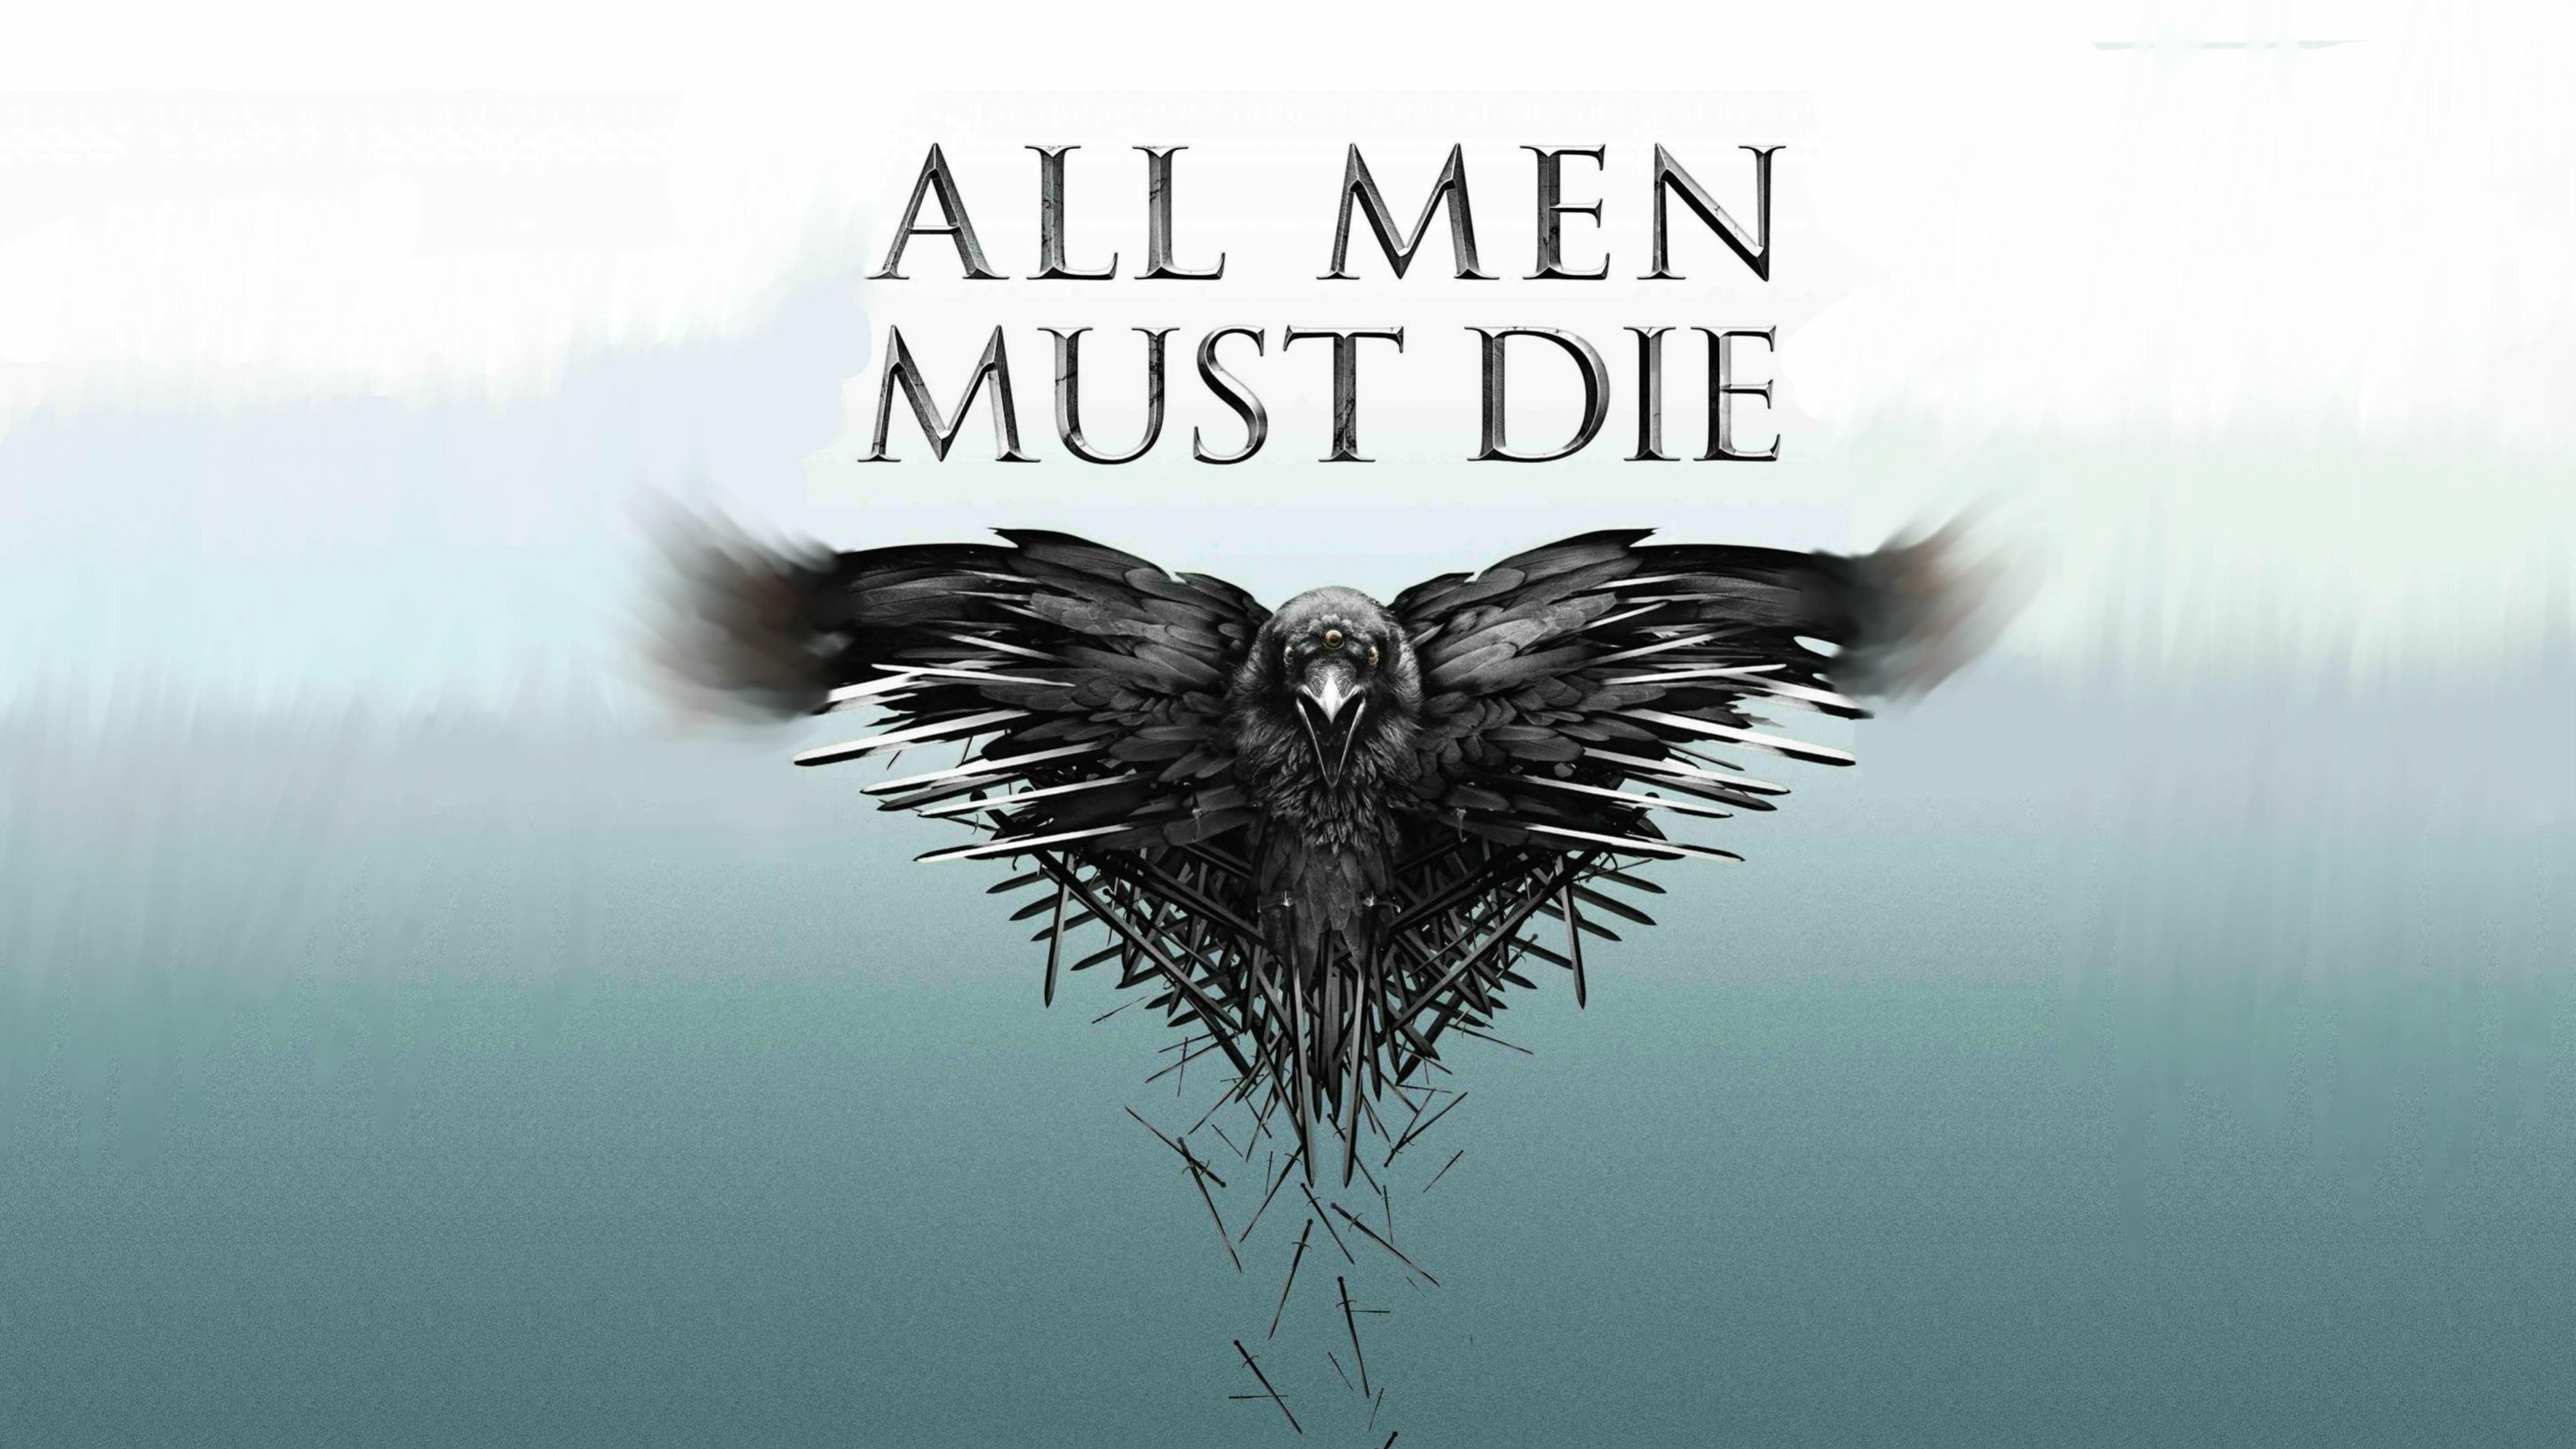 Background For Game Of Thrones Season All Men Must Die Ultra HD